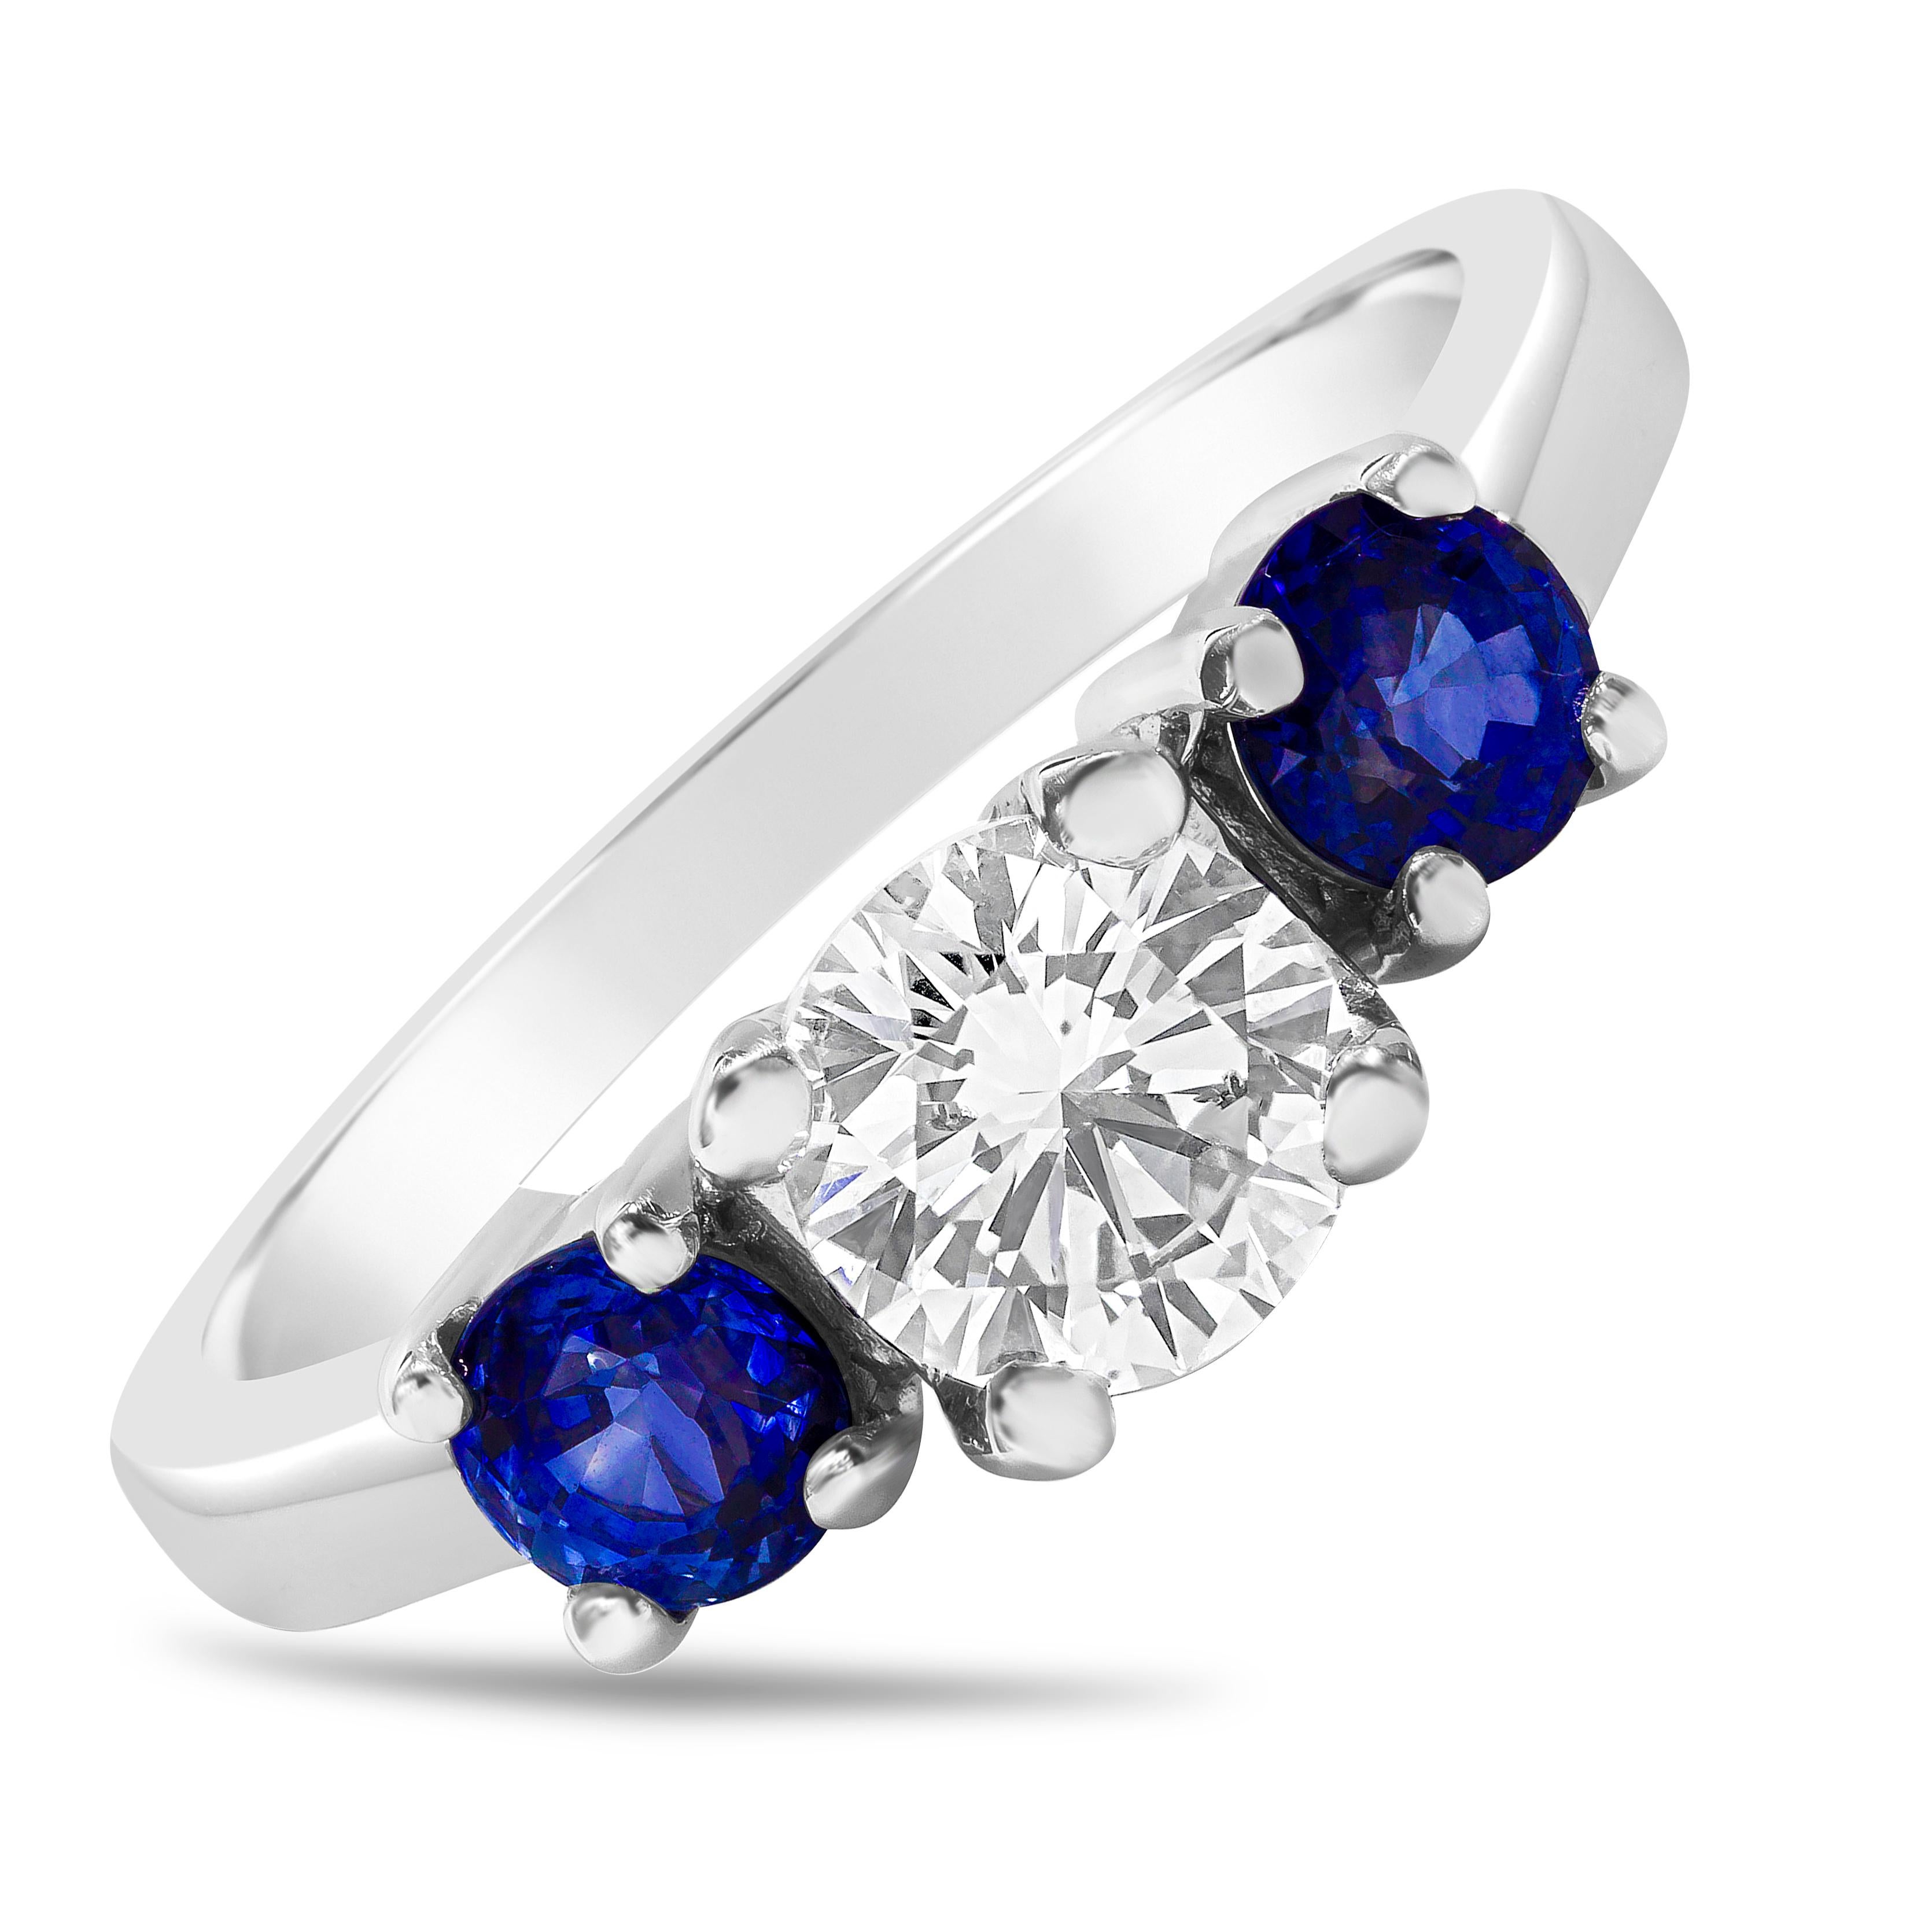 This simple and beautiful three stone engagement ring features a 0.74 carats round brilliant diamond center stone that GIA certified as D color, SI2 in clarity; flanked by two vibrant blue sapphires on each side weighing 0.82 carats total. Set in a